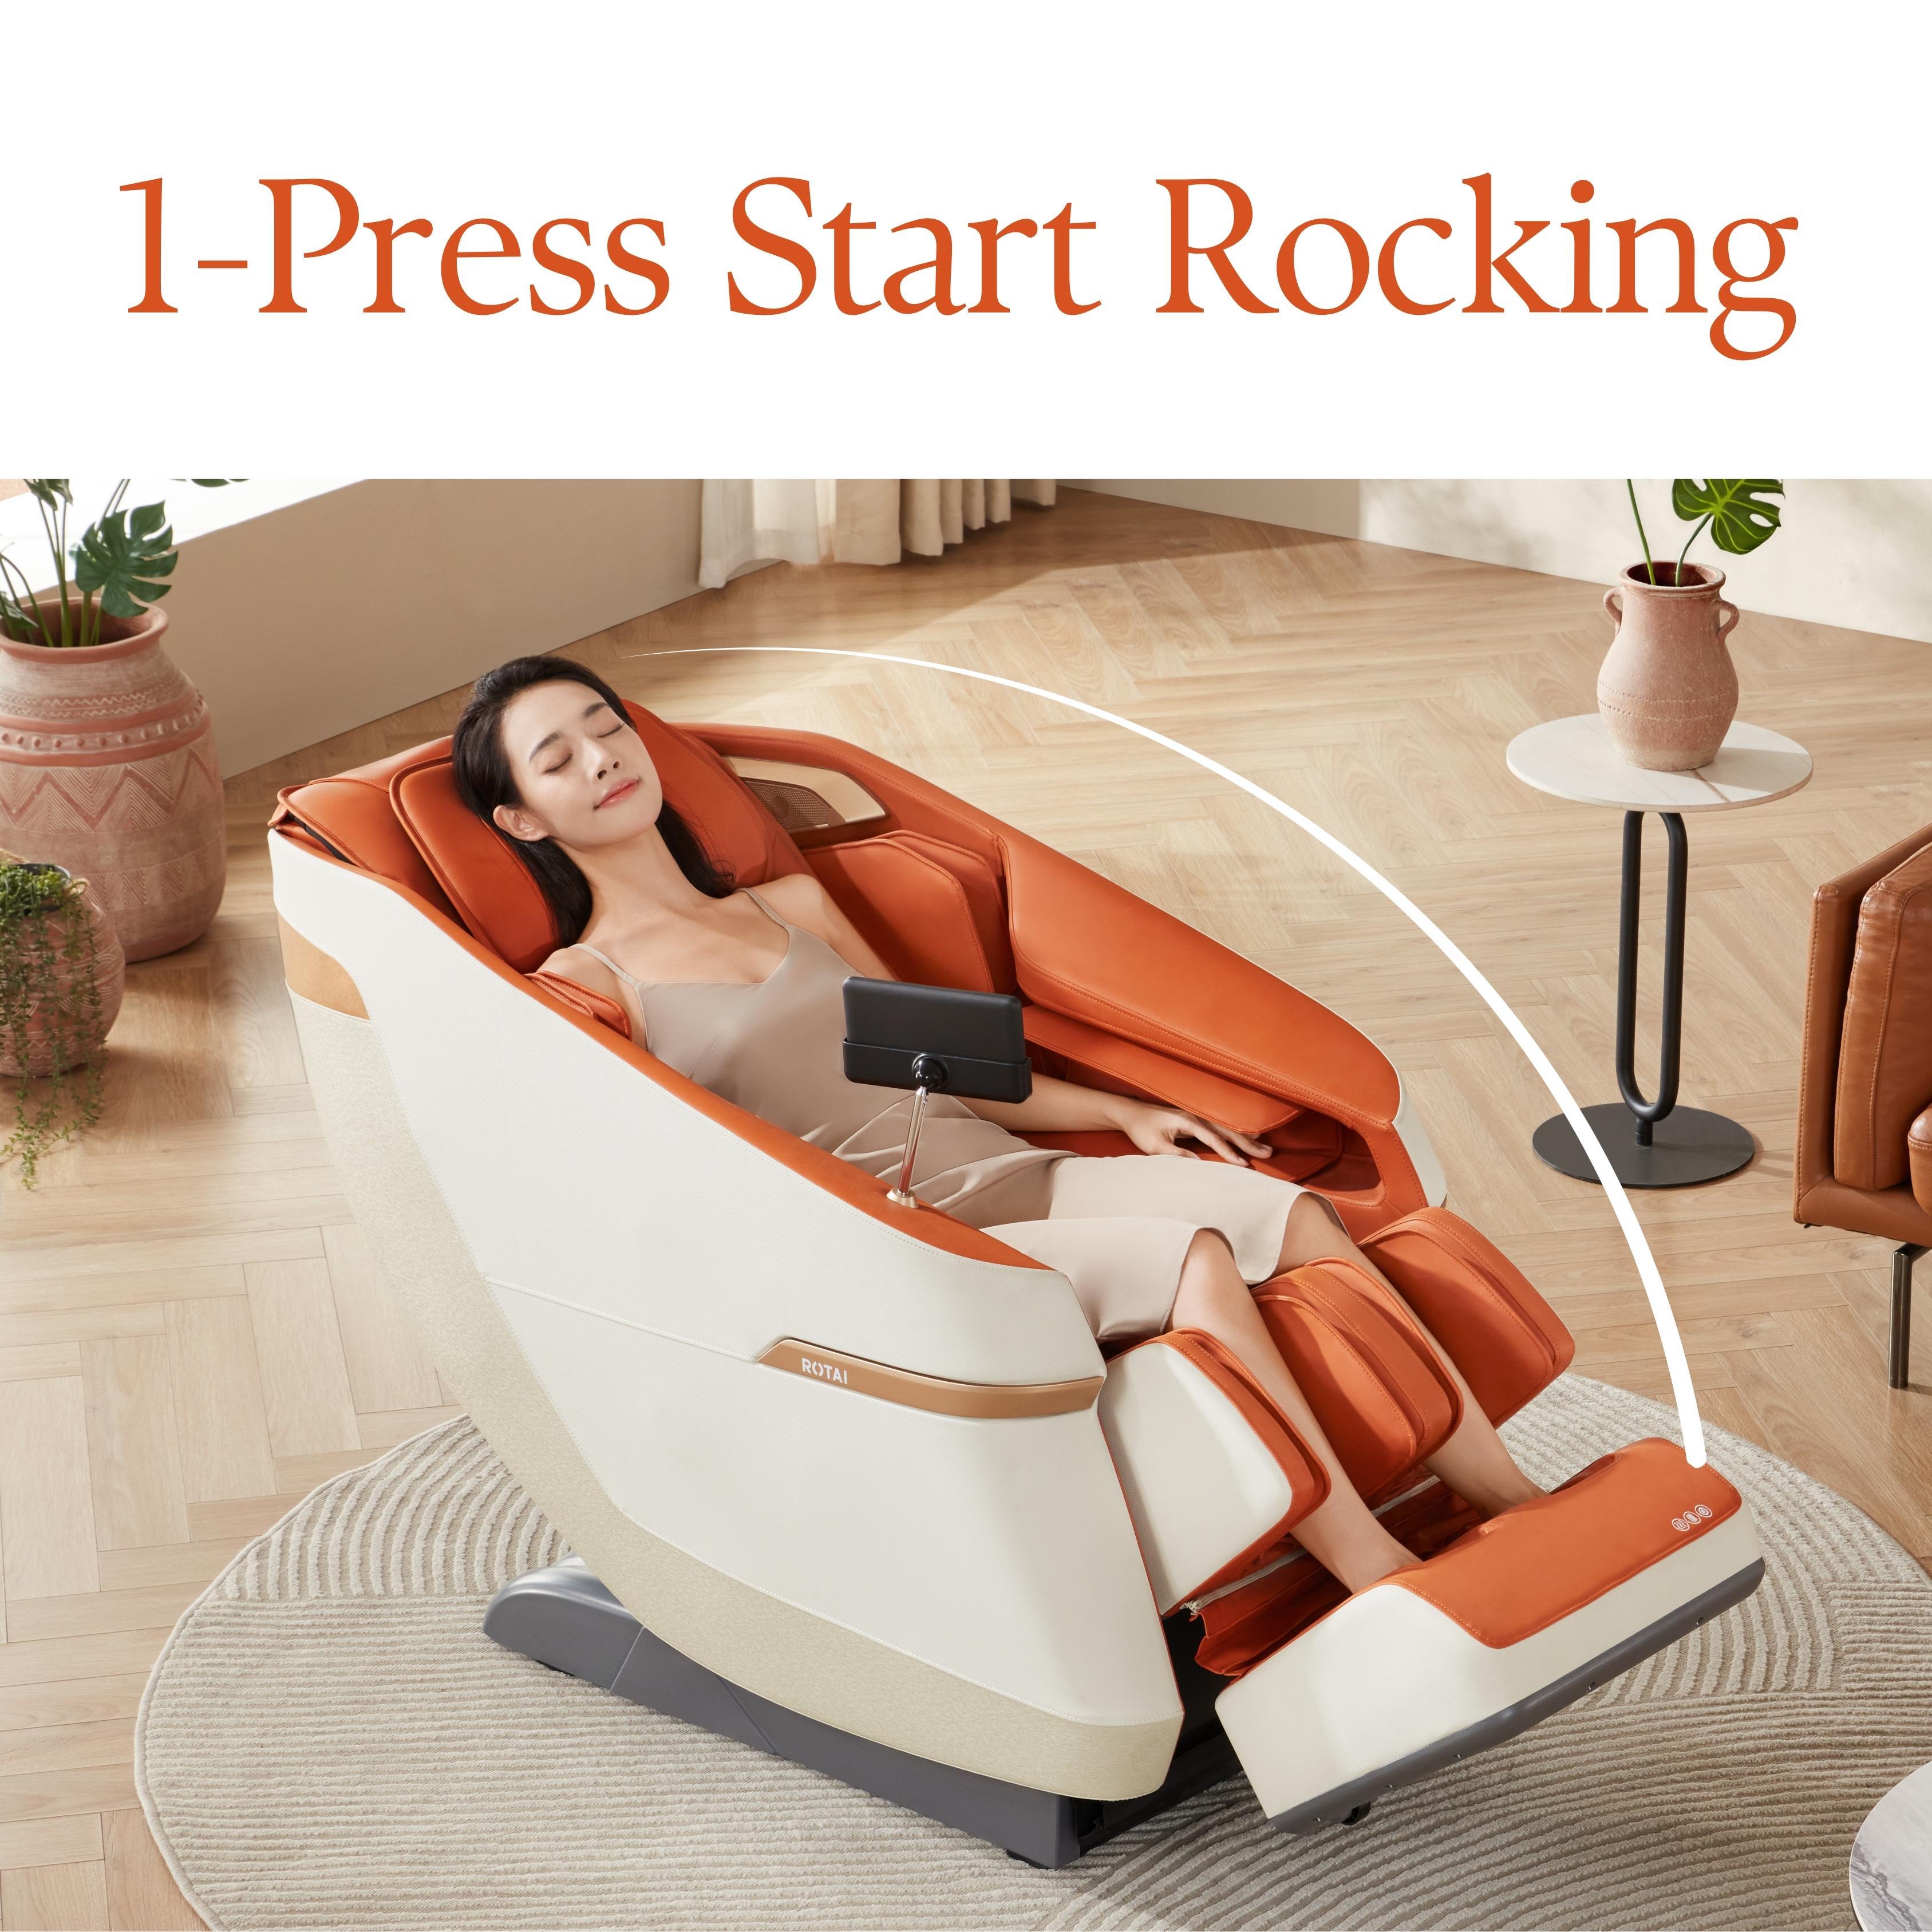 Woman enjoying the Jimny Massage Chair with 1-Press Start Rocking feature in a cozy room noreferrer, best massage chair uae, massage chair Dubai, massage chair uae, massage chair Saudi Arabia, كرسي التدليك, Best massage chair in Dubai UAE, buy massage cha